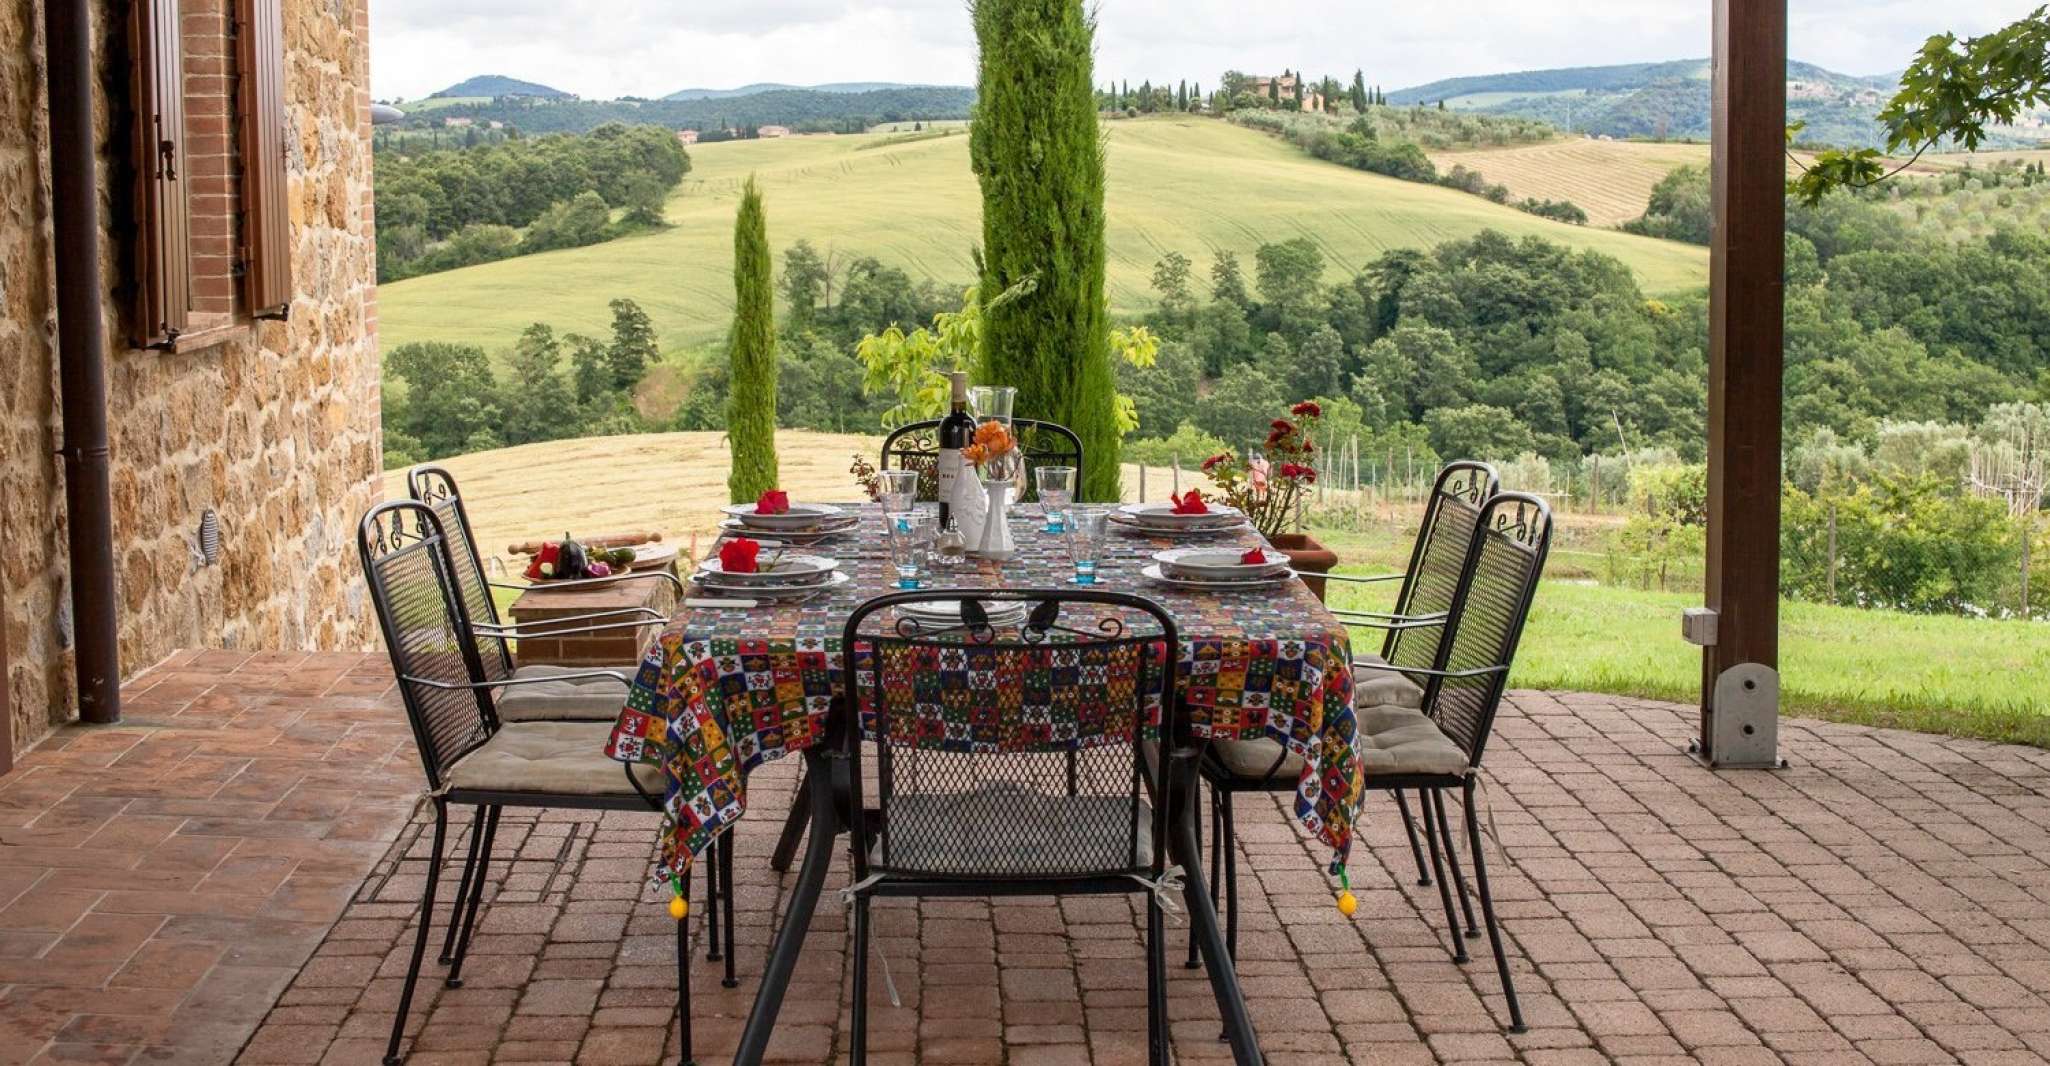 Pienza, Dining Experience at a Local's Home - Housity